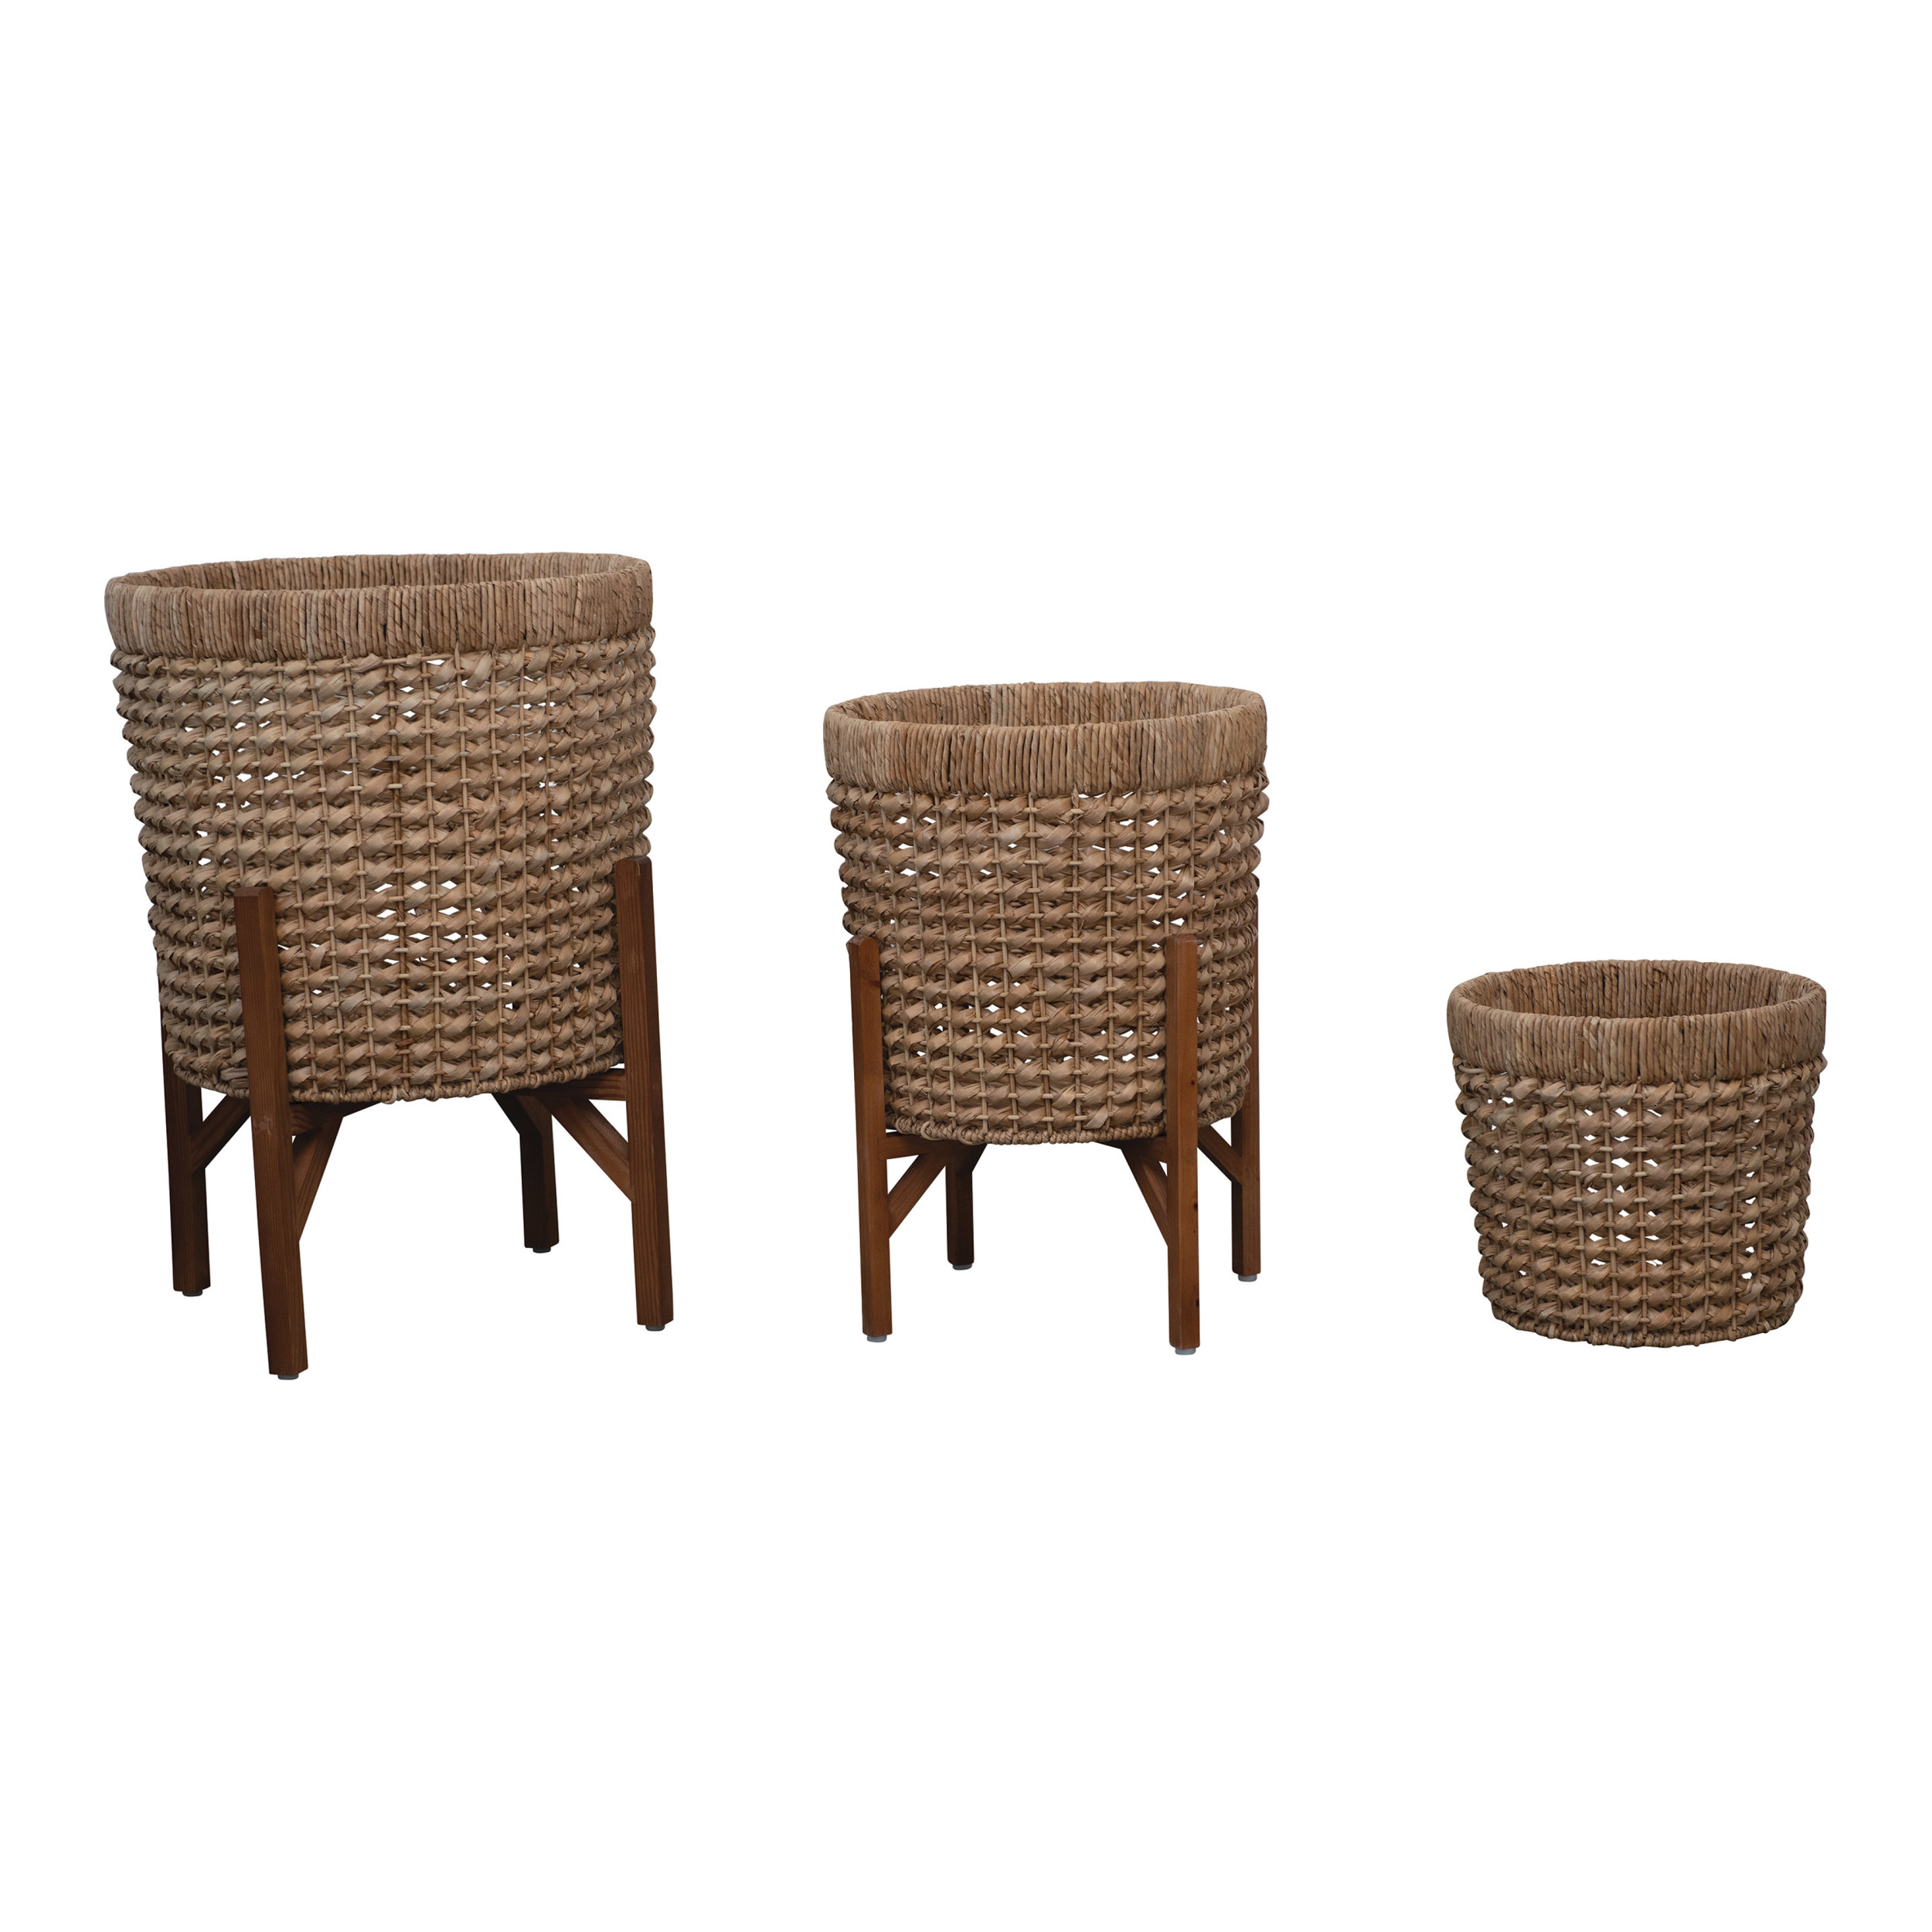 PAFEN 2-in-1 set of flower pots, rattan look, umber plant pot with insert